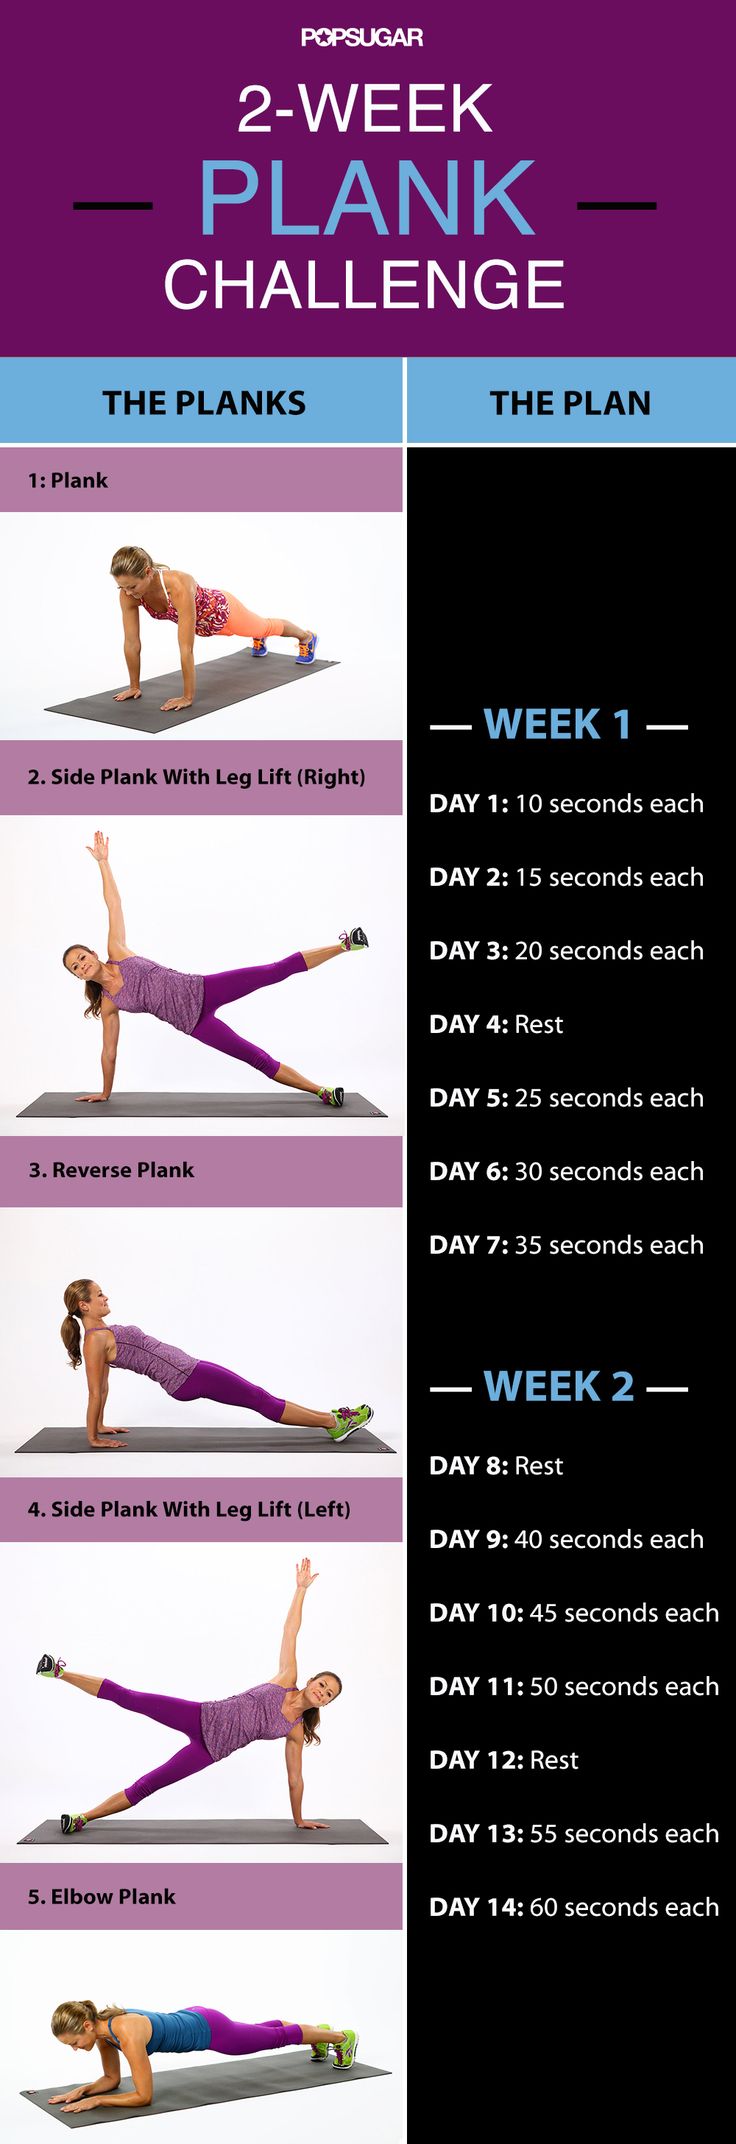 2-Week Plank Challenge: Build Up to a 5-Minute Plank